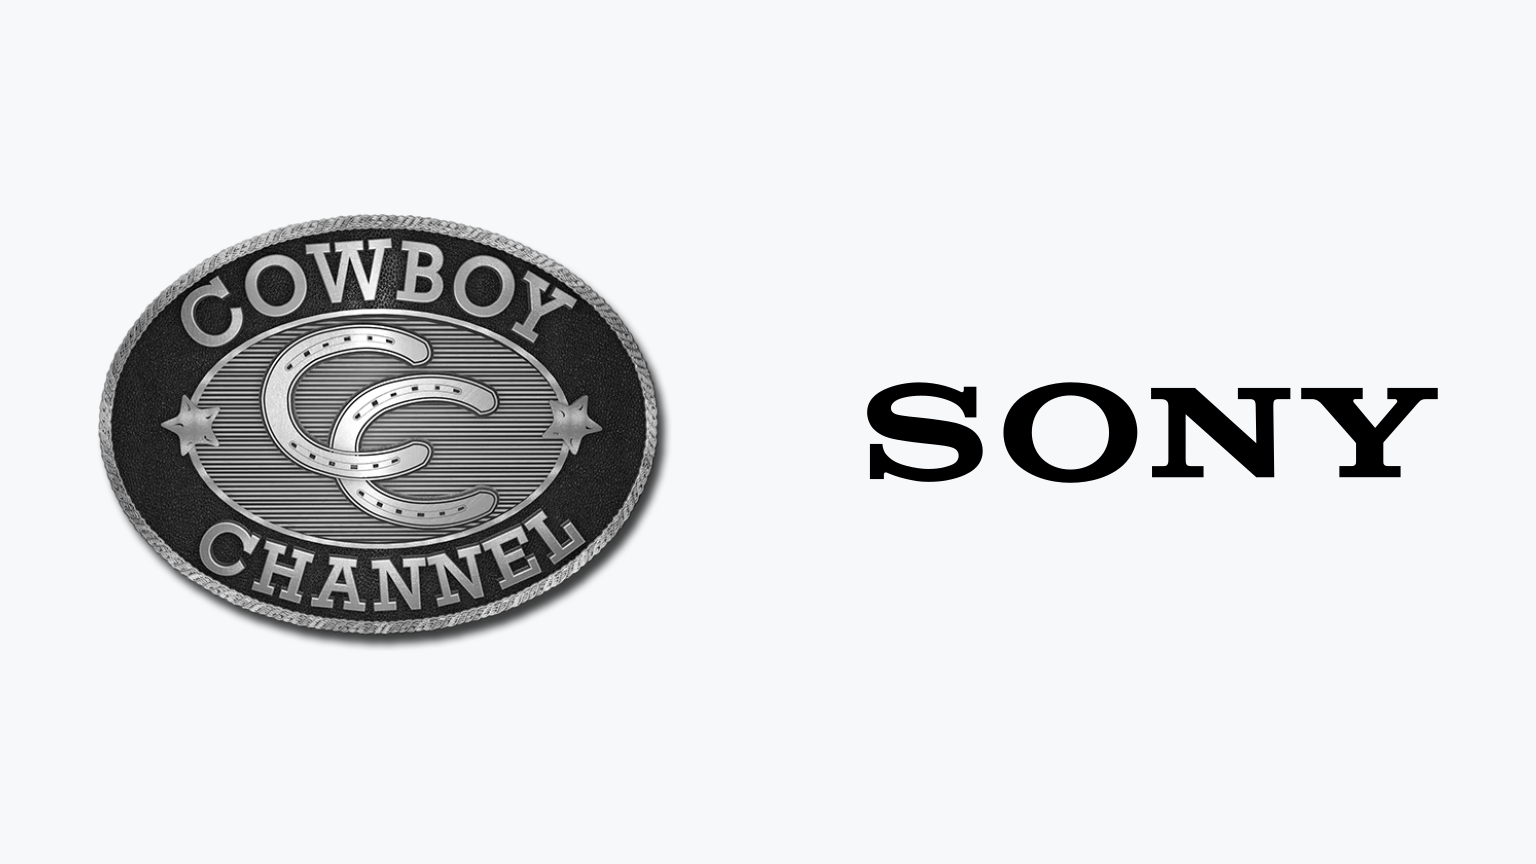 How to Watch Cowboy Channel + on Sony Smart TV